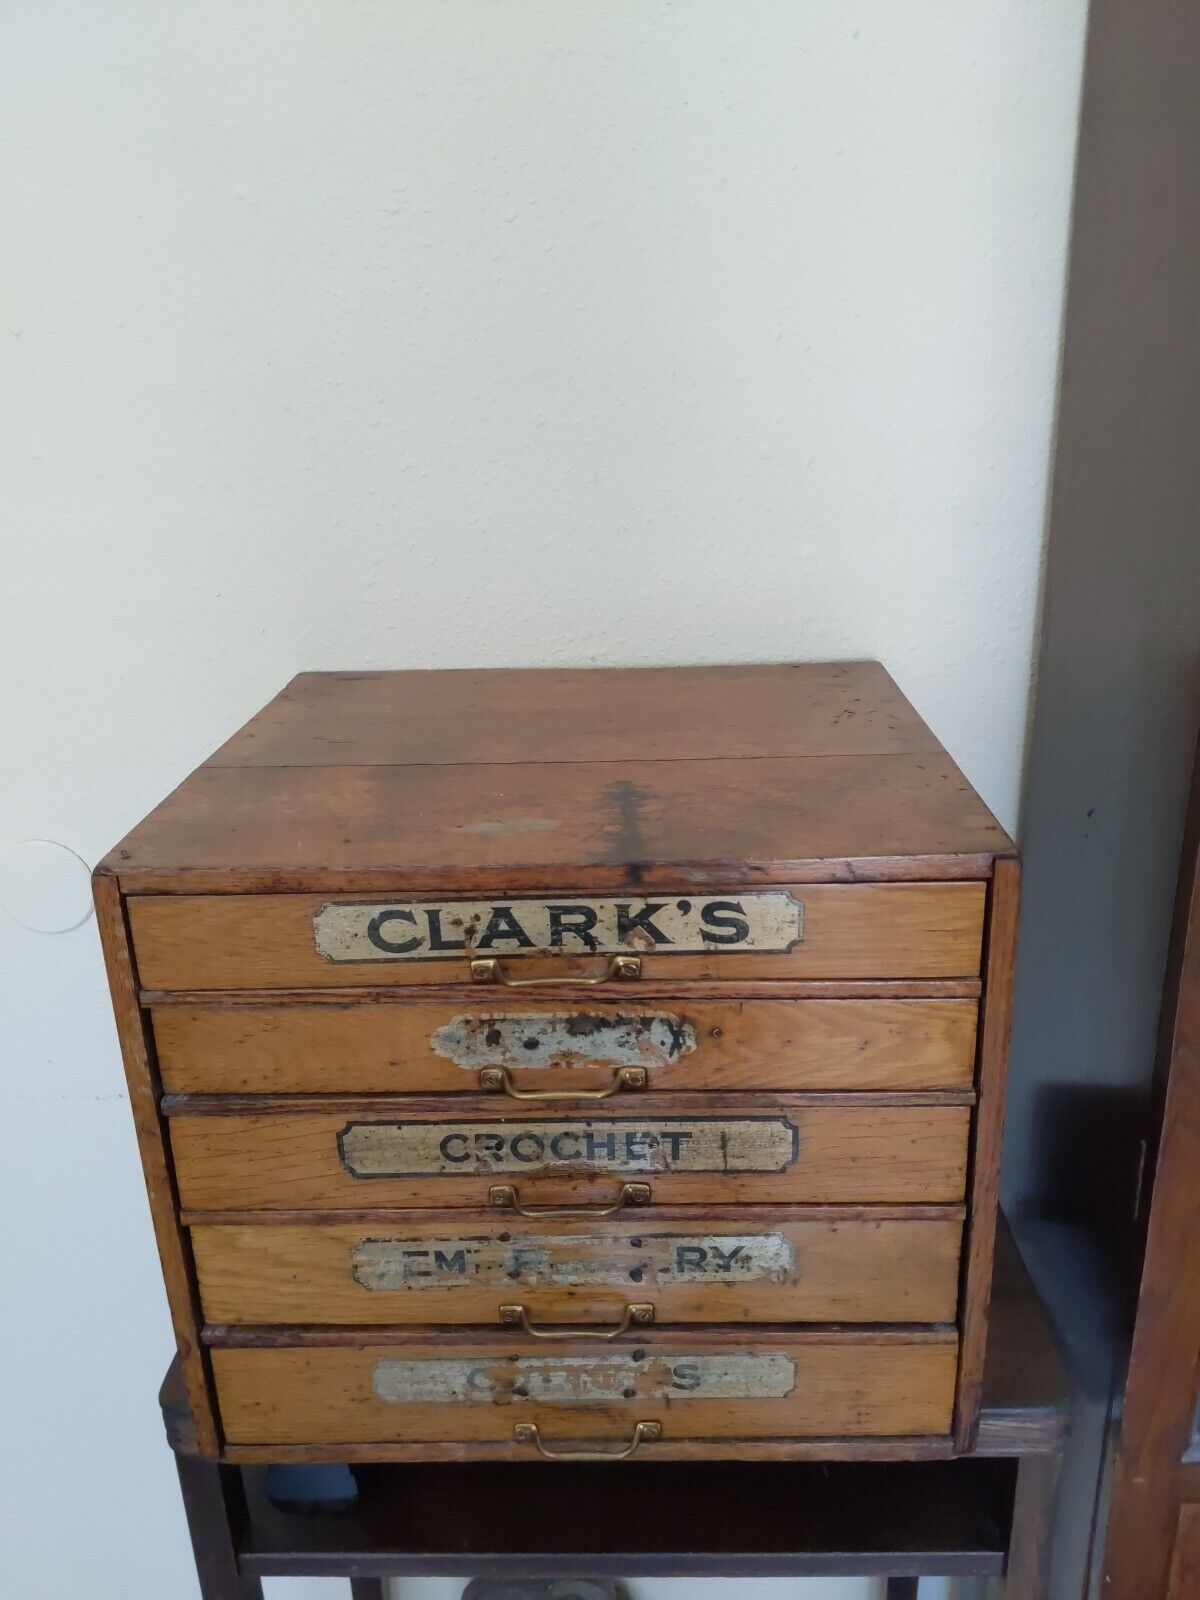 VTG 5- DRAWER Antique c.1900 Clark's Spool Cabinet General Store Display chest